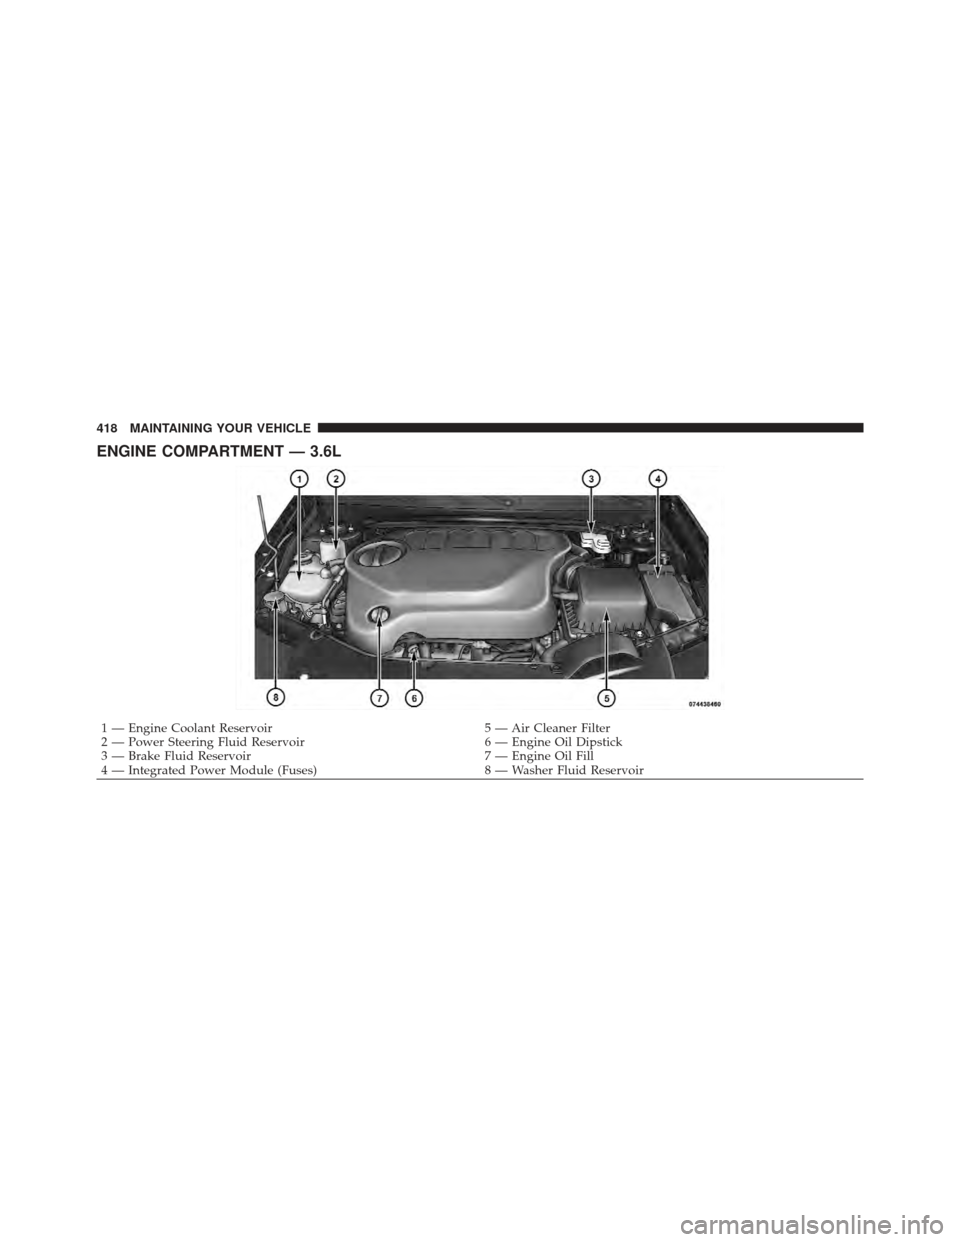 CHRYSLER 200 CONVERTIBLE 2012 1.G Owners Manual ENGINE COMPARTMENT — 3.6L
1 — Engine Coolant Reservoir5 — Air Cleaner Filter
2 — Power Steering Fluid Reservoir 6 — Engine Oil Dipstick
3 — Brake Fluid Reservoir 7 — Engine Oil Fill
4 �